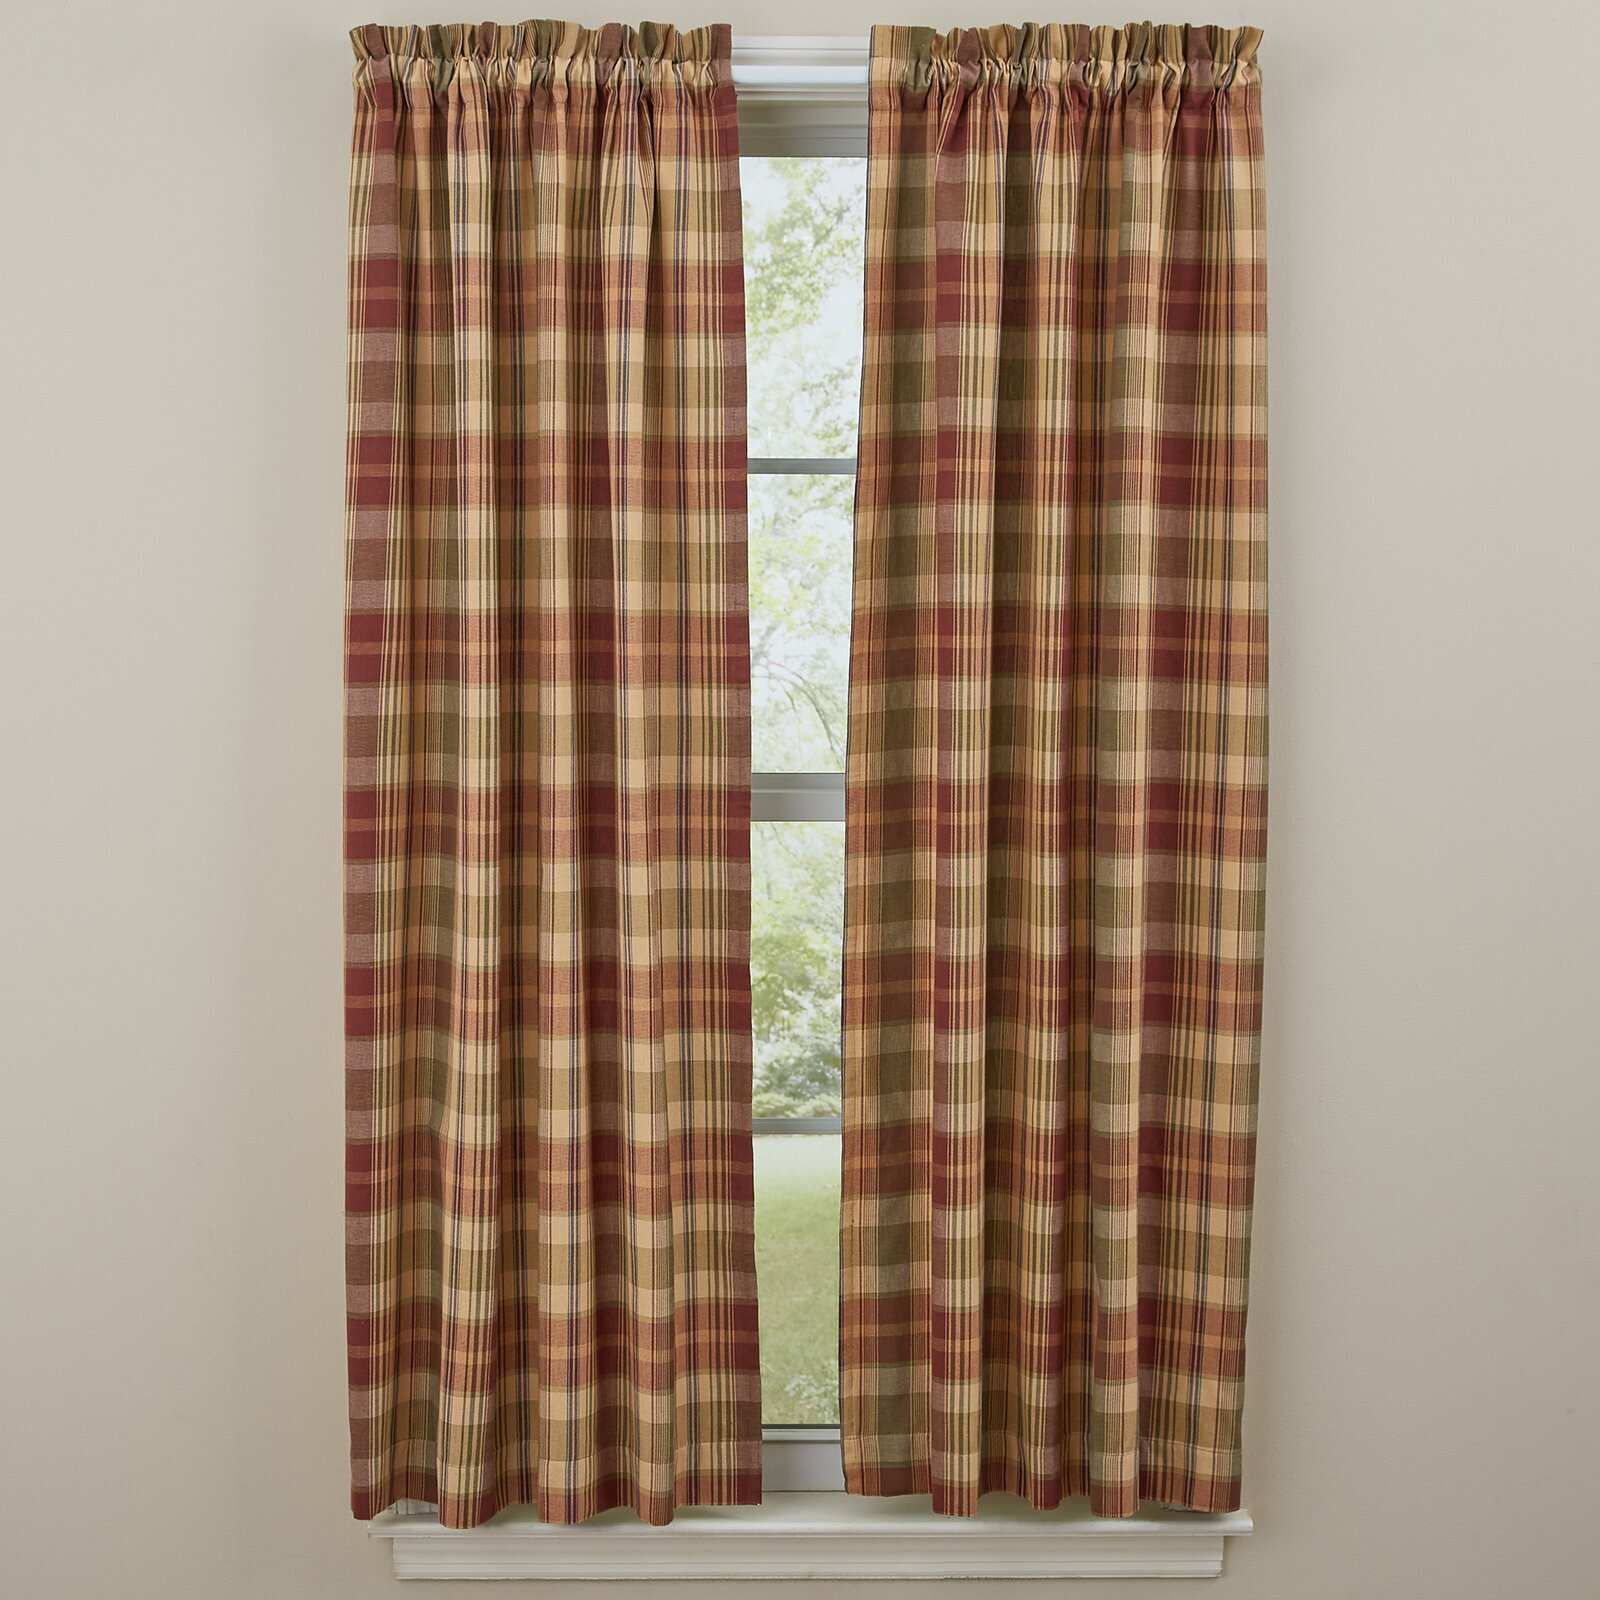 Plaid curtain for bedroom